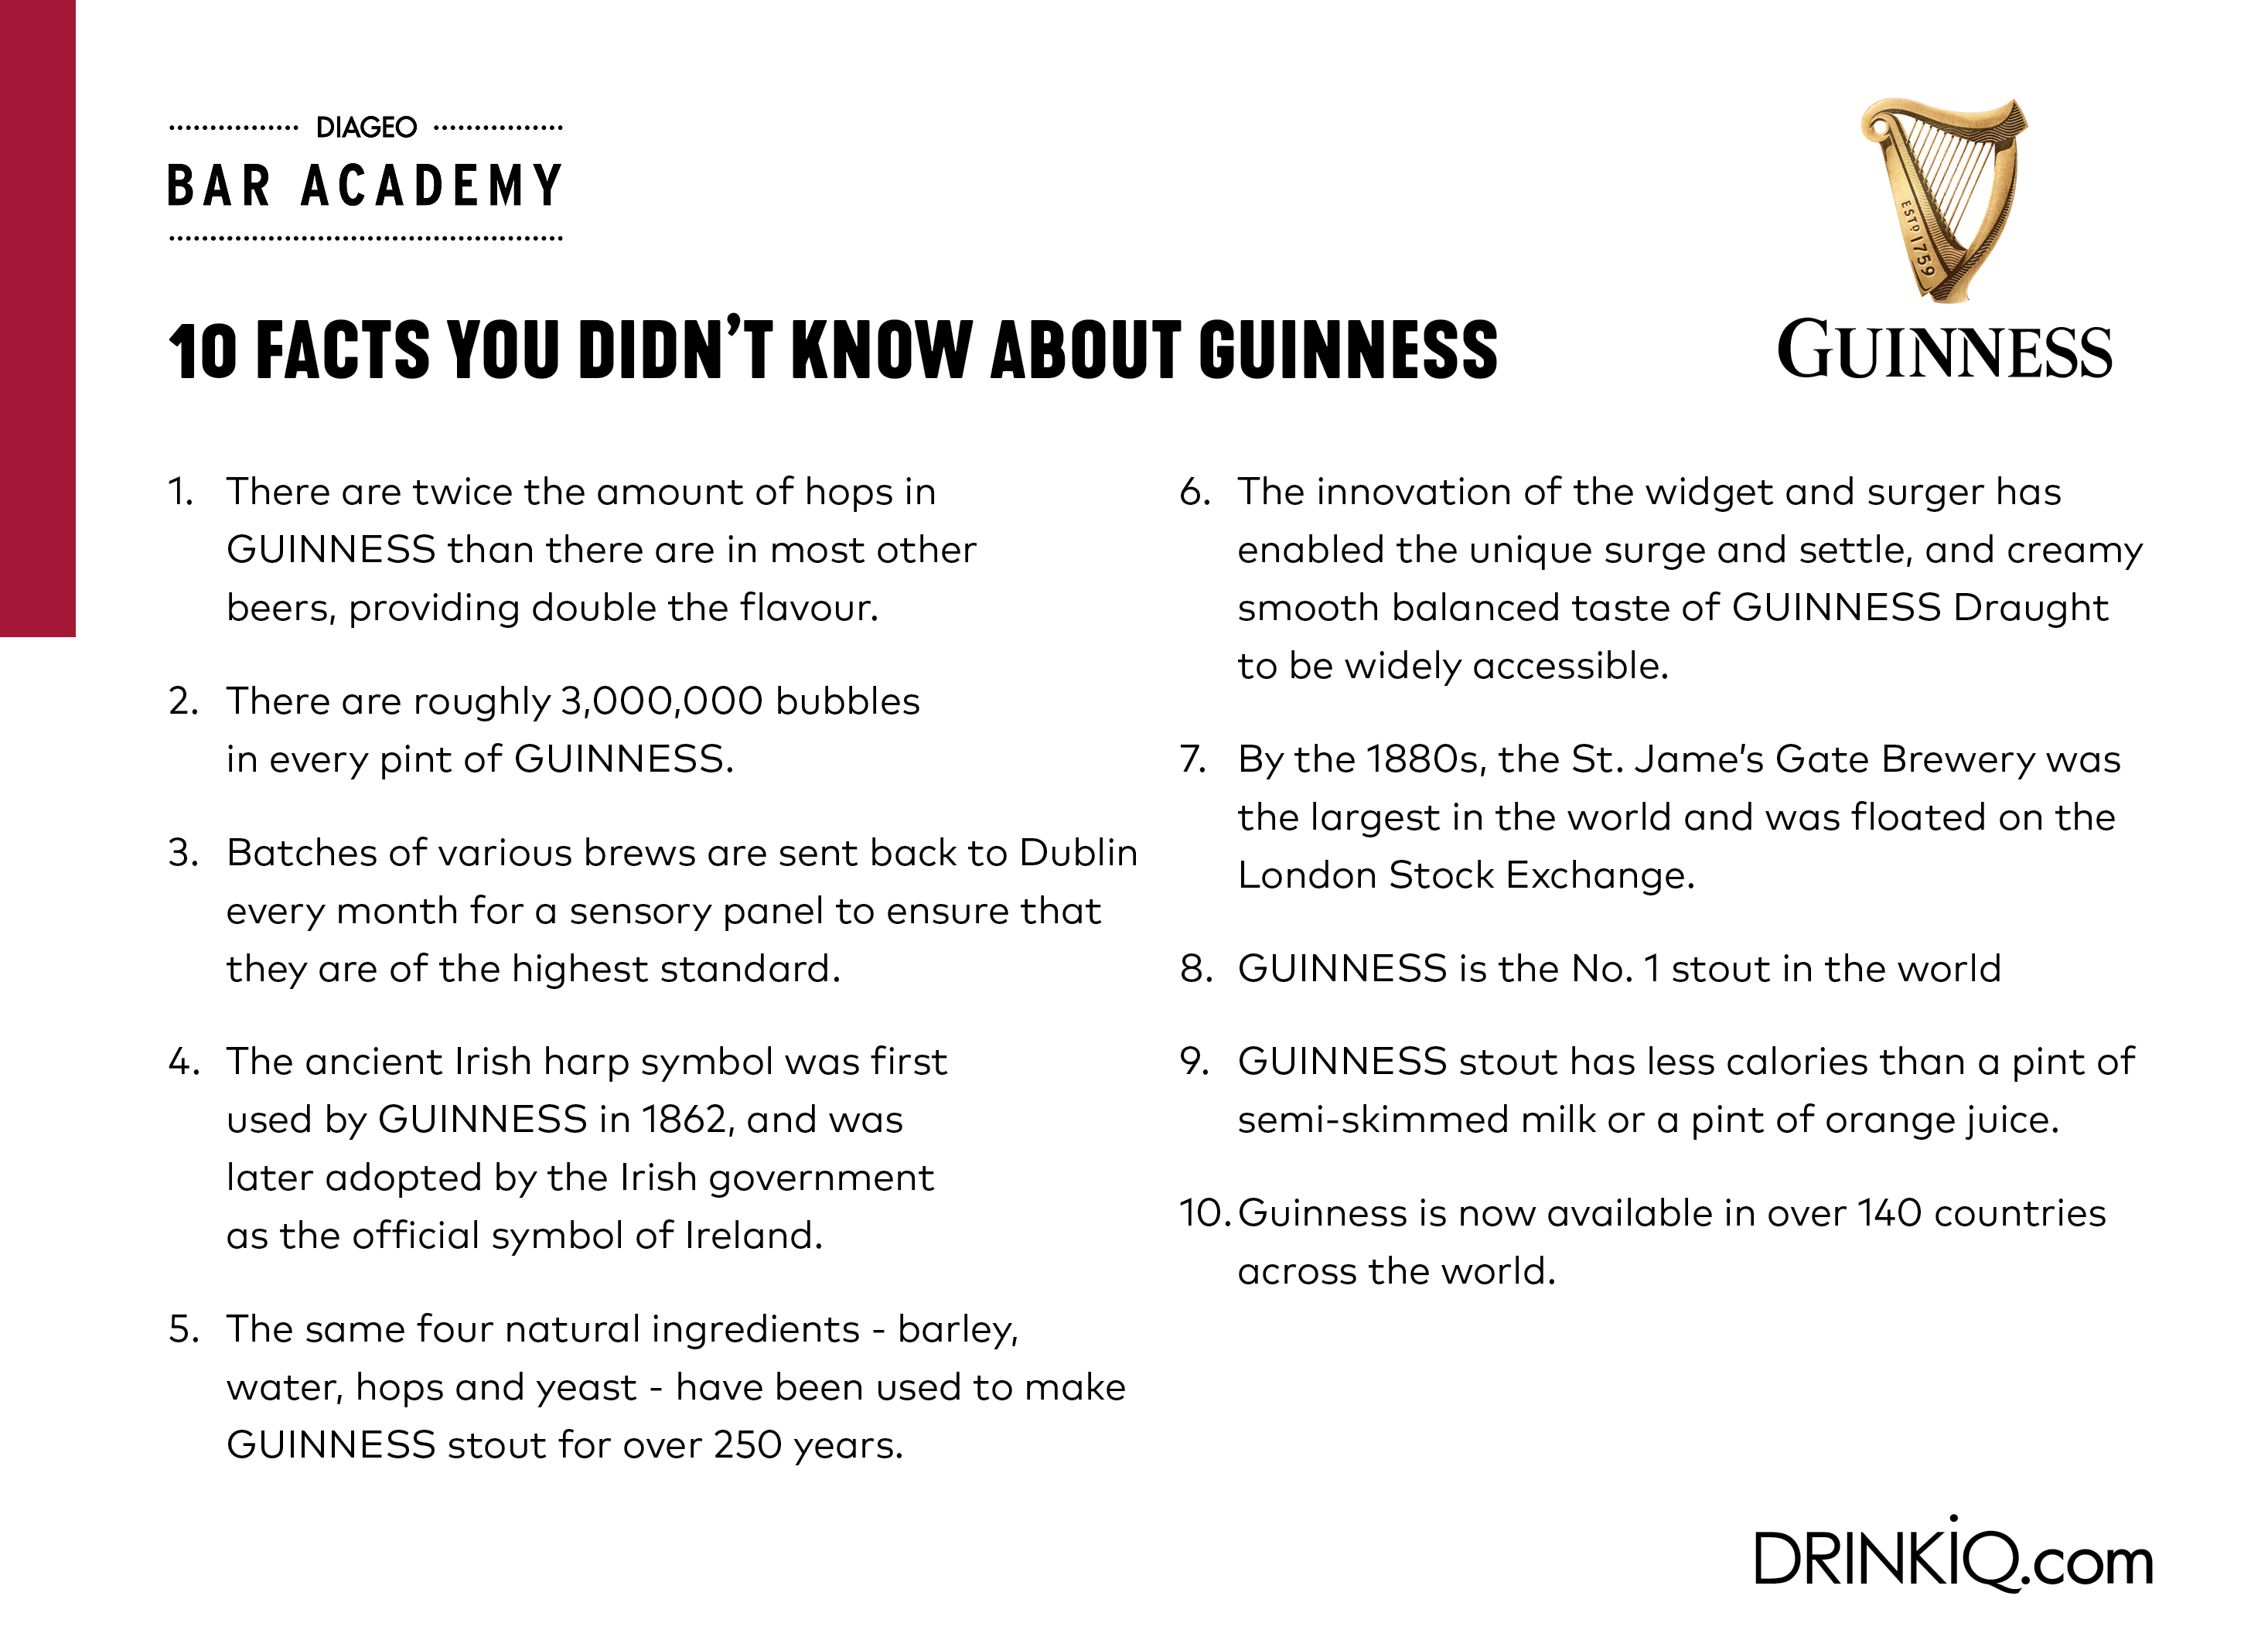 Numbered list of “10 facts you didn’t know about Guinness.” Next to the Harp icon of the Guinness logo.